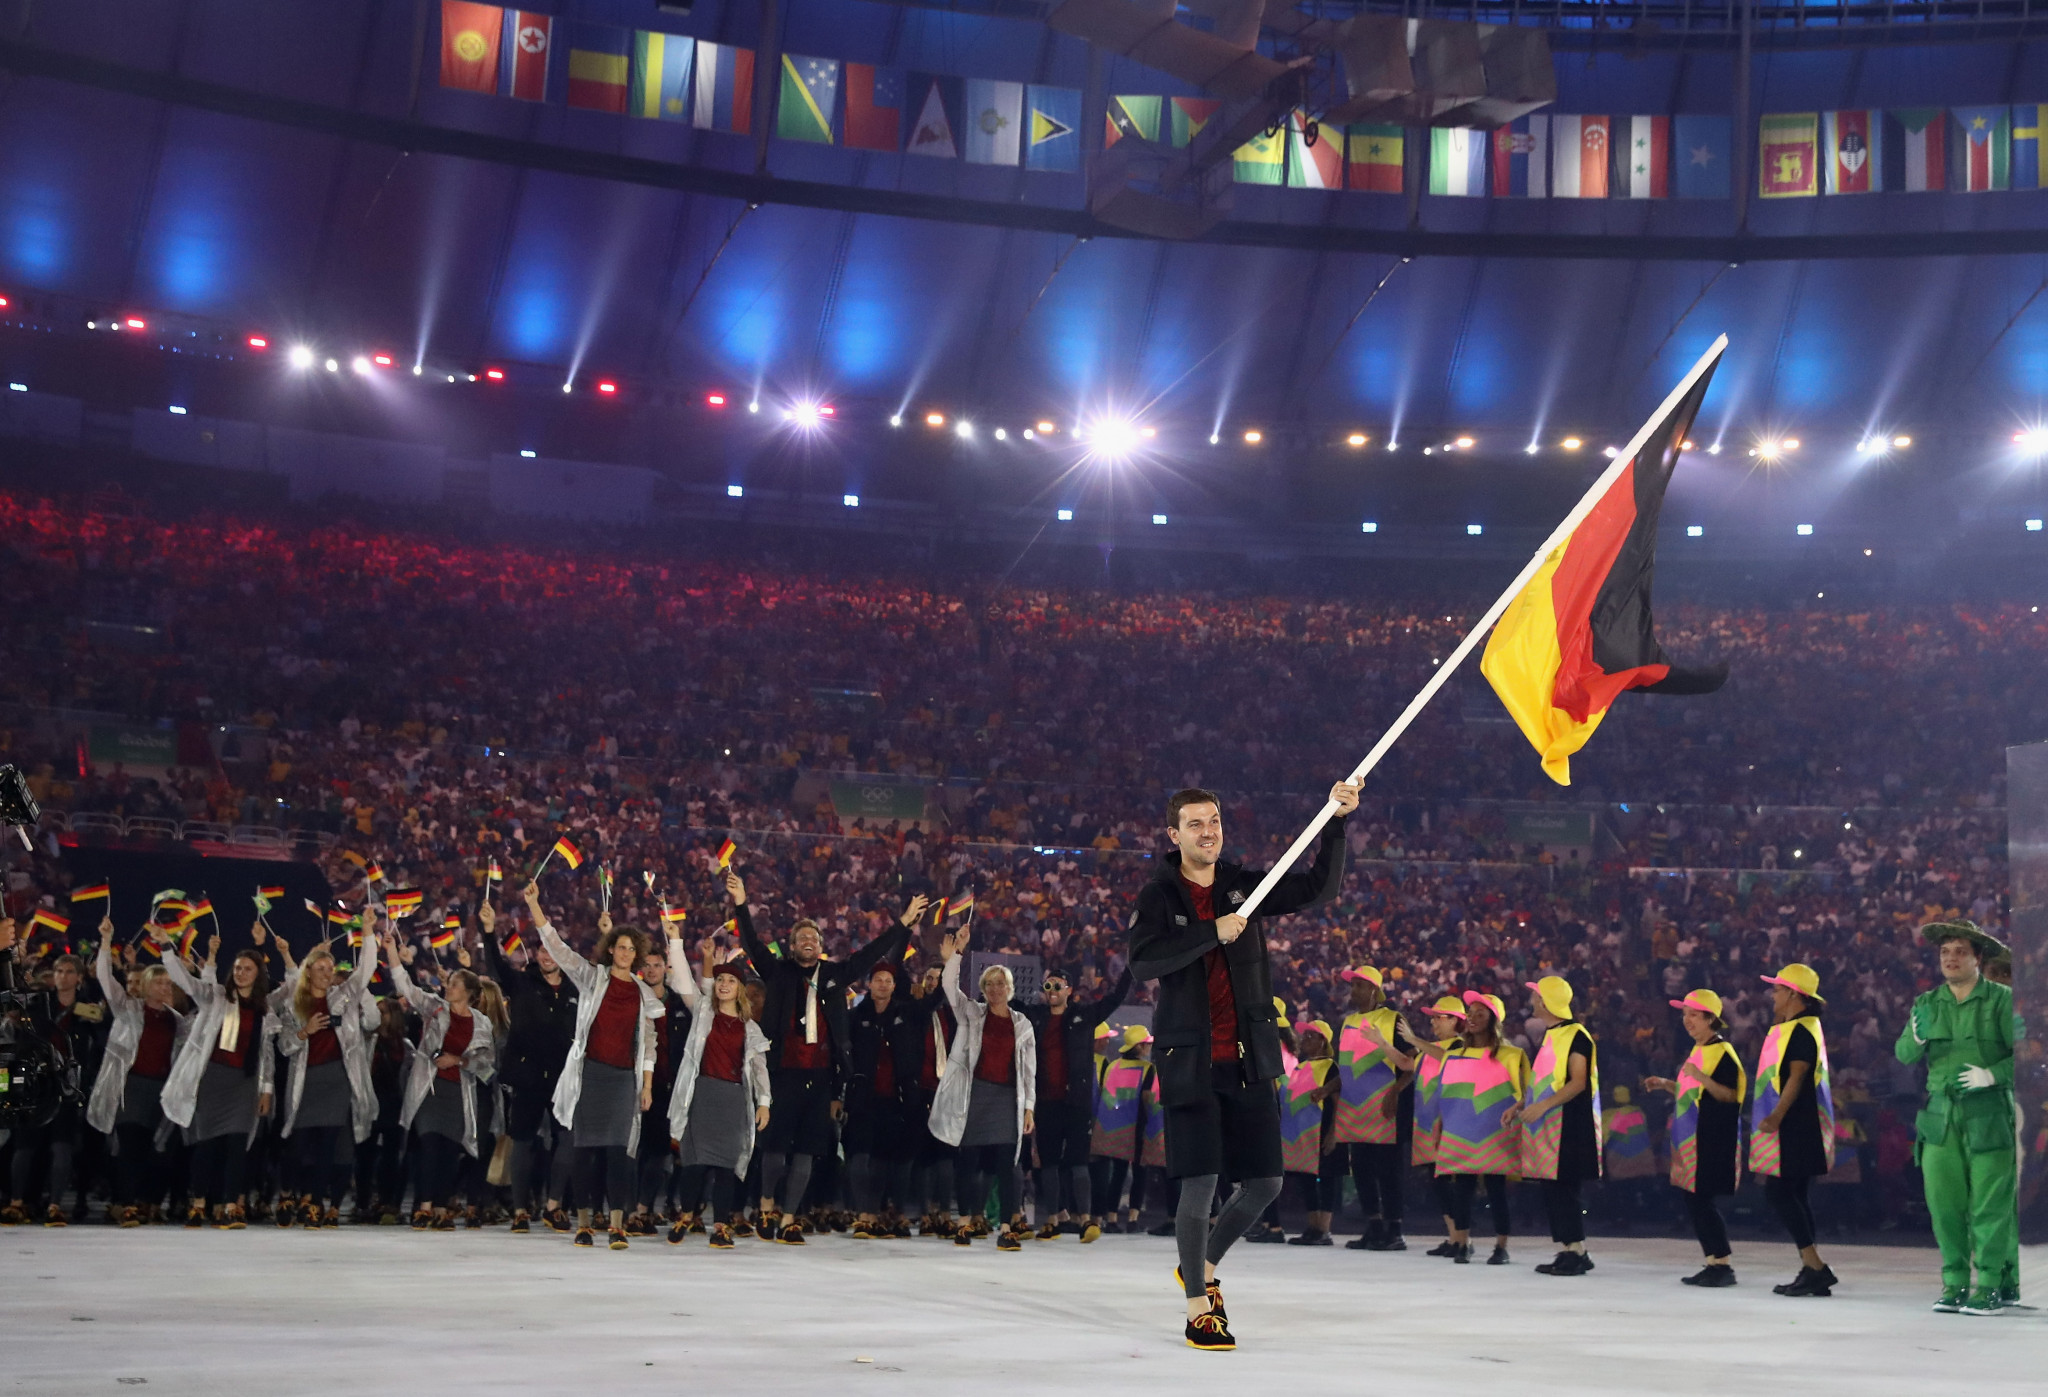 Deloitte will be recognised as an official partner of Team Germany ©Getty Images